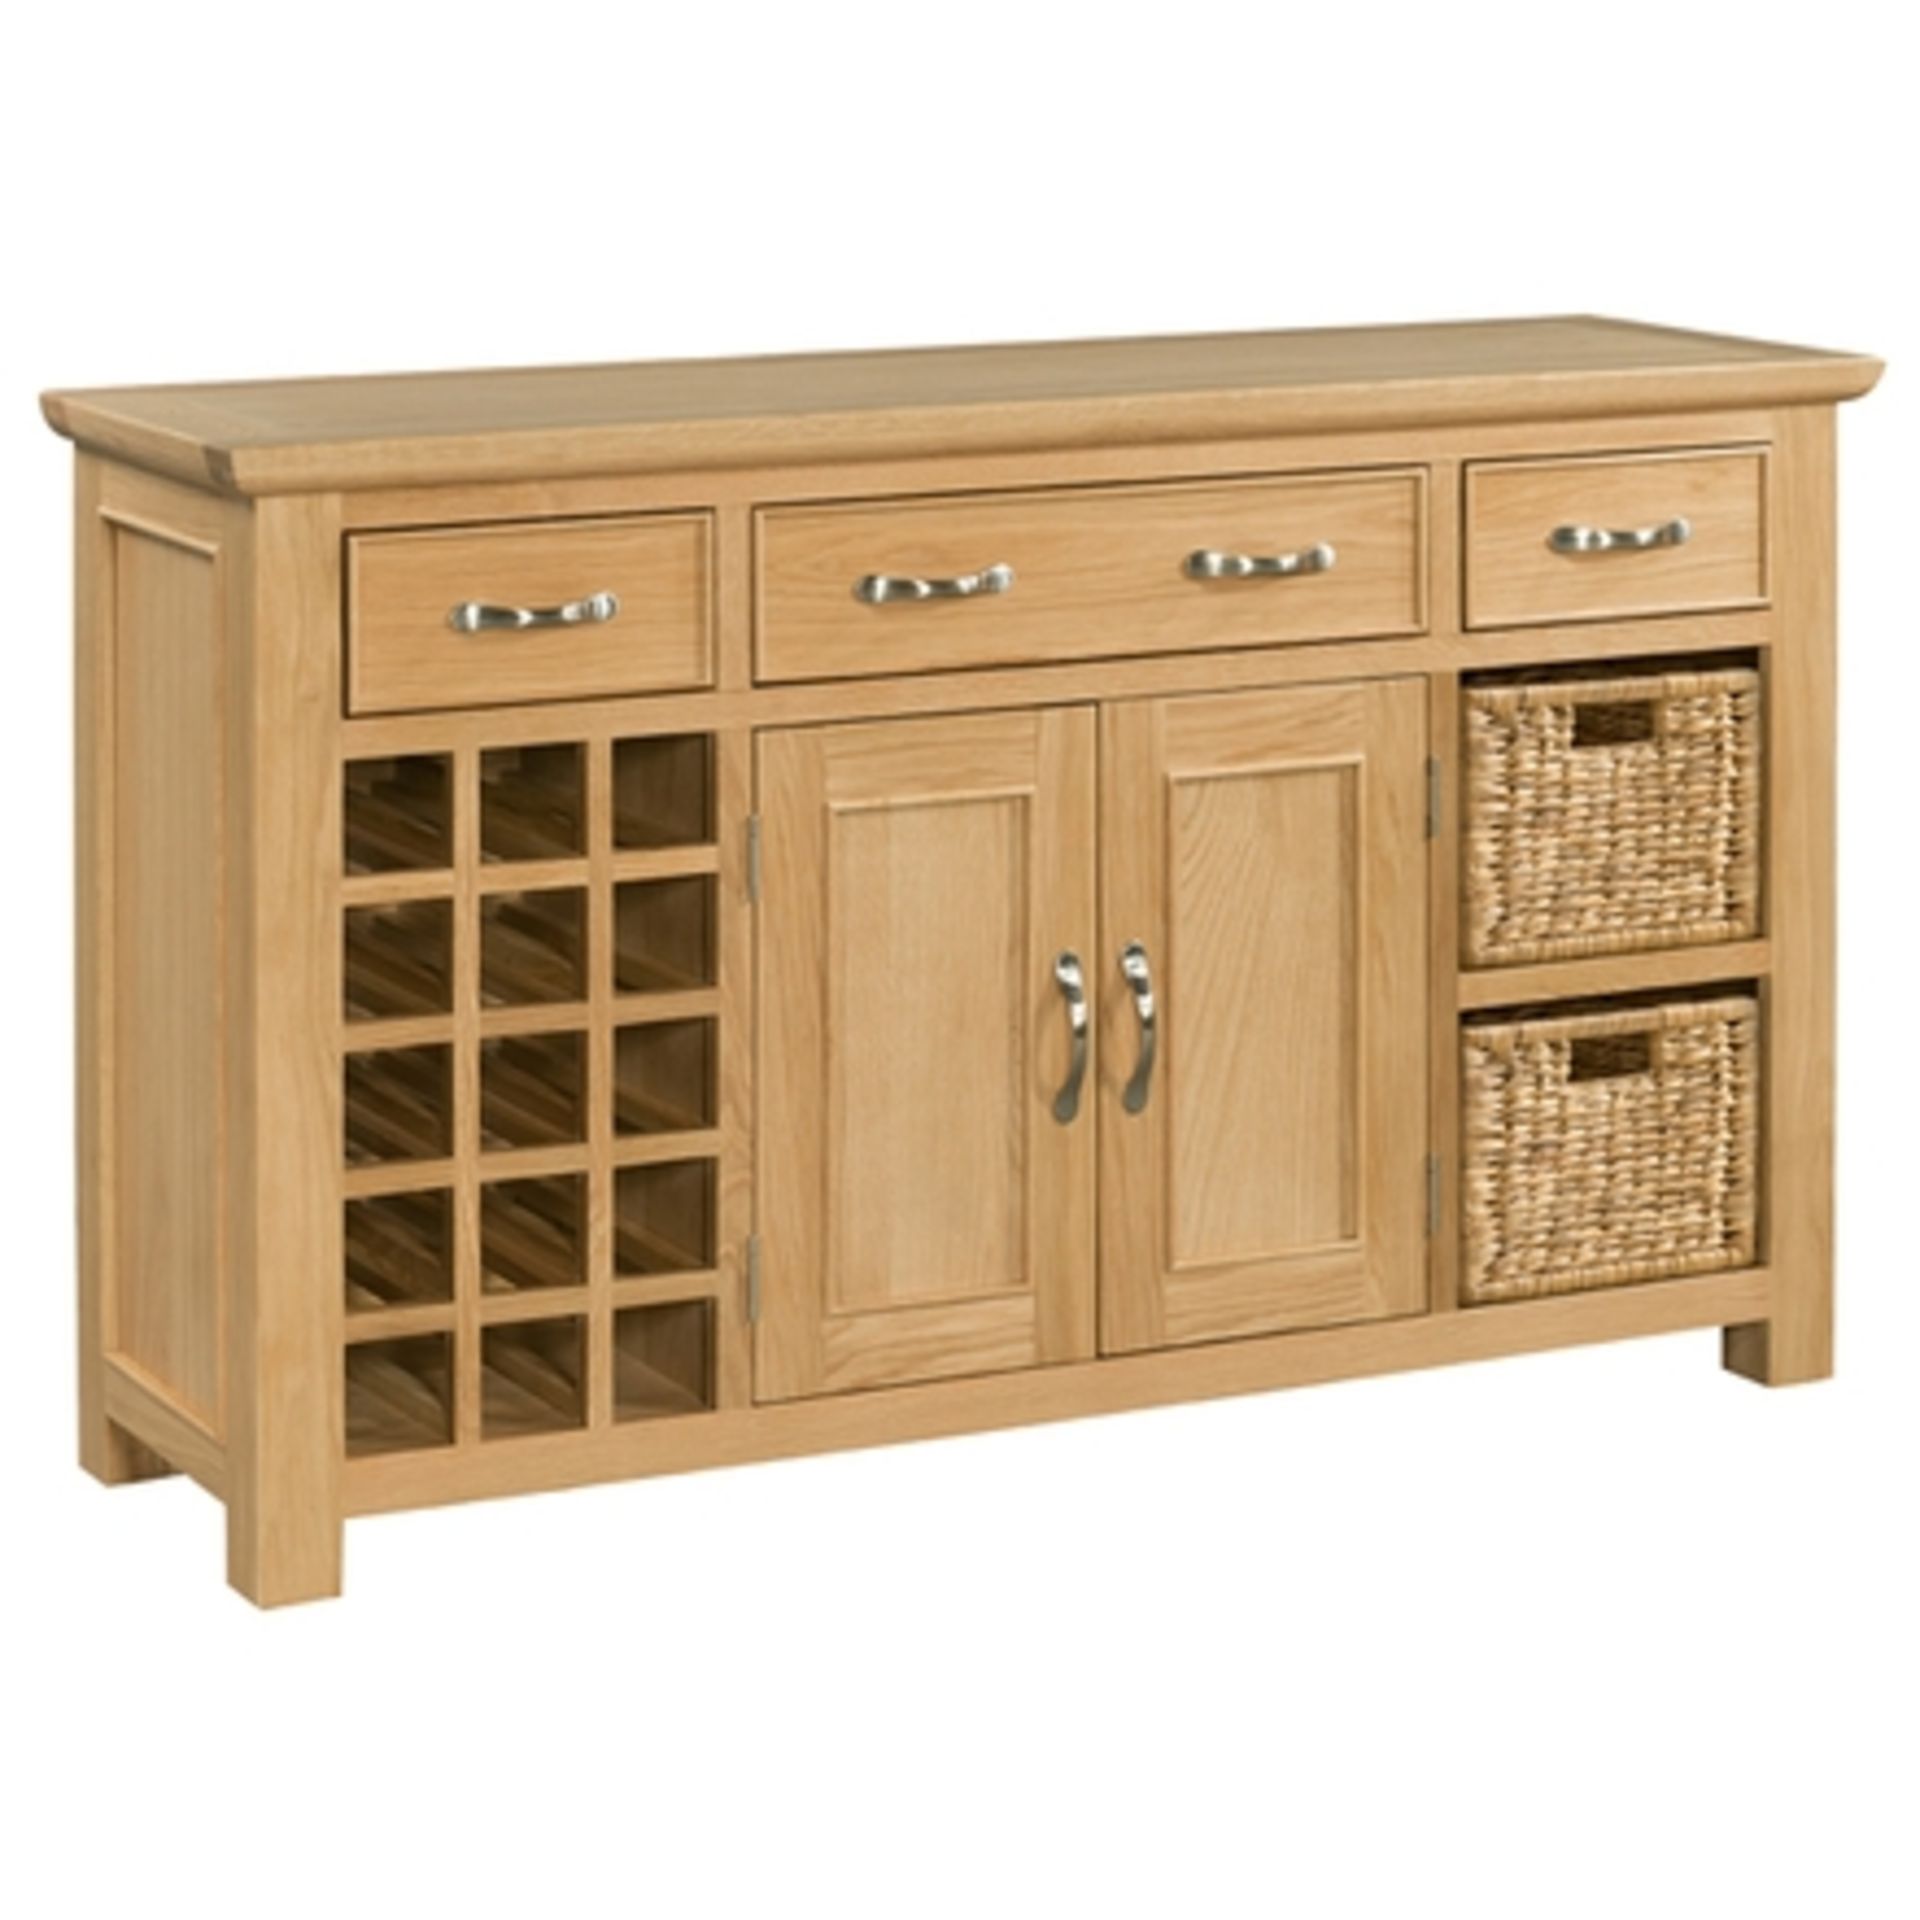 V Brand New Siena Large sideboard with wine rack with baskets 150 x 44 x 88 cms RRP559.00 (